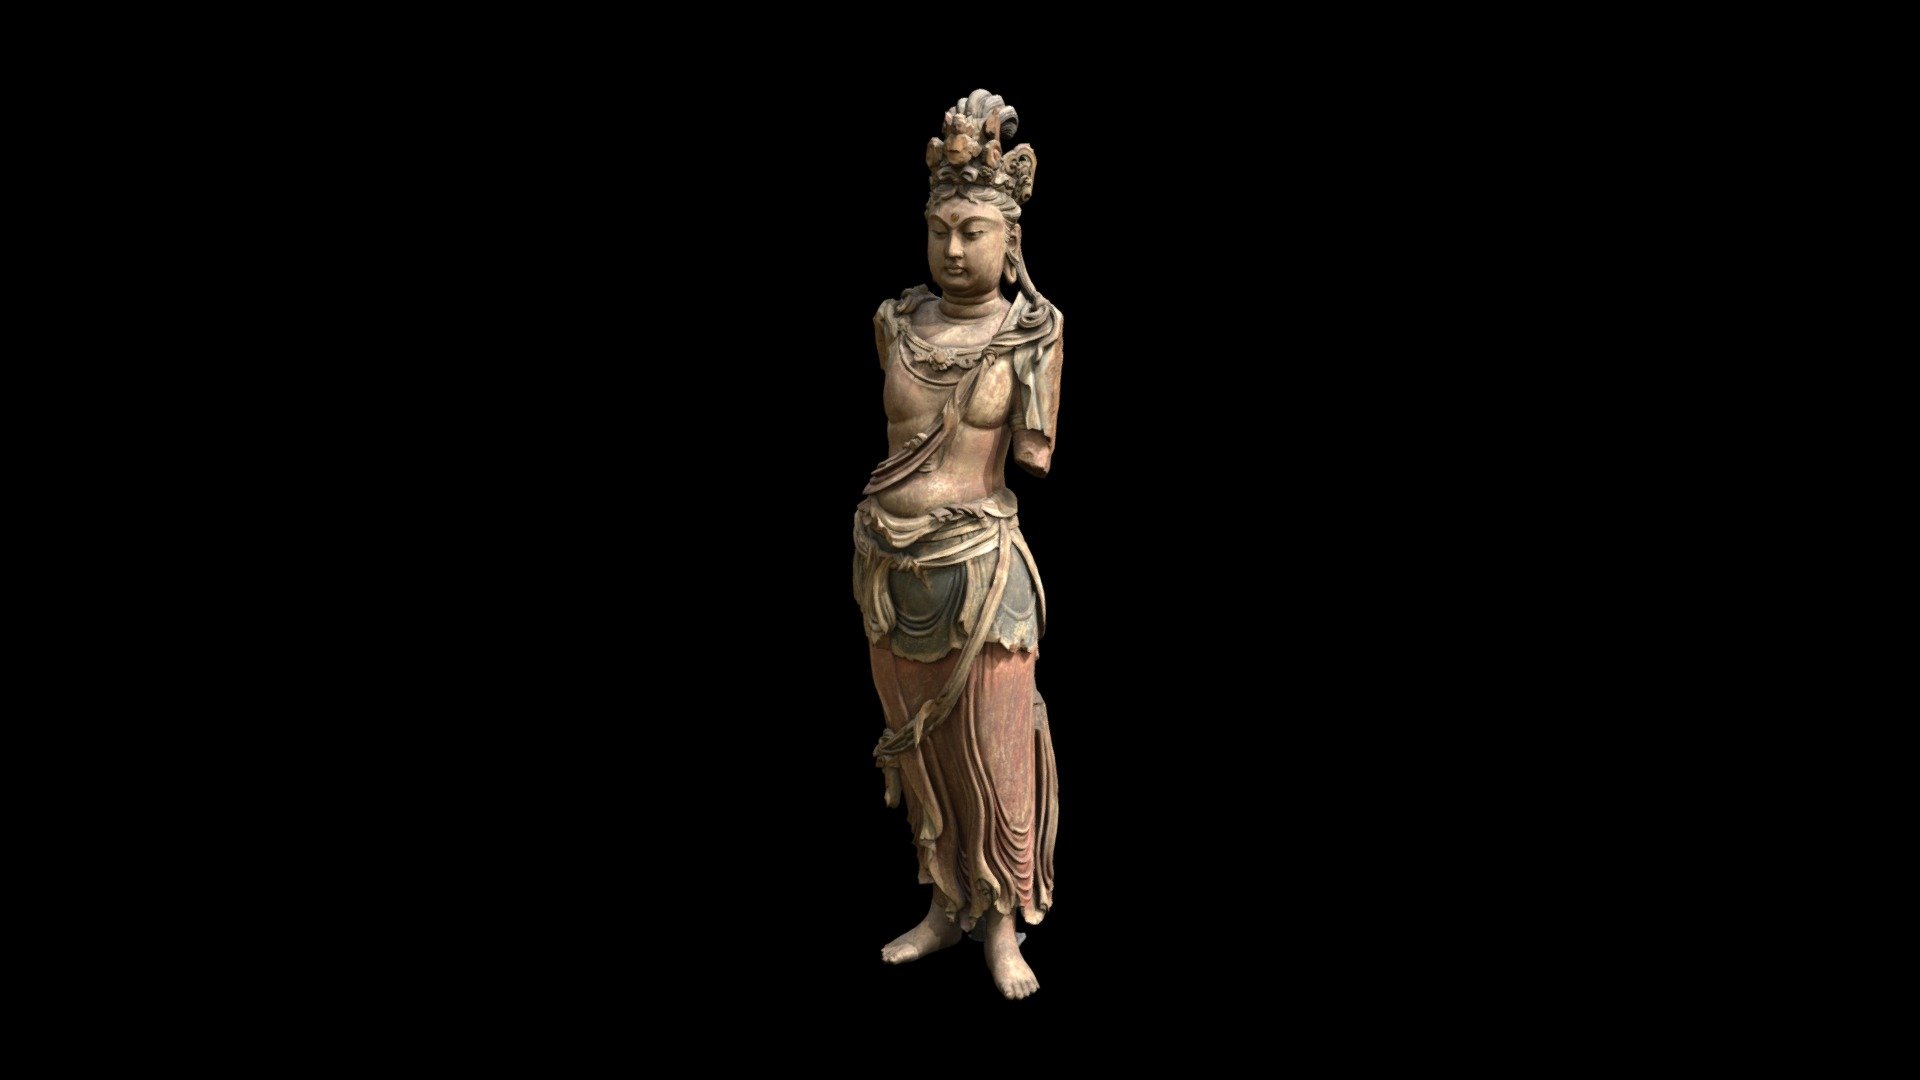 You can copy, modify, and distribute this work, even for commercial purposes, all without asking permission. Learn more about The Cleveland Museum of Art’s Open Access initiative: http://www.clevelandart.org/open-access-faqs

Eleven-Headed Guanyin, 十一面觀音菩薩, 1100-1200. China, late Northern Song dynasty (960-1127) - Jin dynasty (1115-1234). Wood with polychromy and cut gold; overall: 218.5 cm (86 in.). The Cleveland Museum of Art, Purchase from the J. H. Wade Fund 1981.53

Learn more on The Cleveland Museum of Art’s Collection Online: https://www.clevelandart.org/art/1981.53 - 1981.53 Eleven-Headed Guanyin - Download Free 3D model by Cleveland Museum of Art (@clevelandart) 3d model